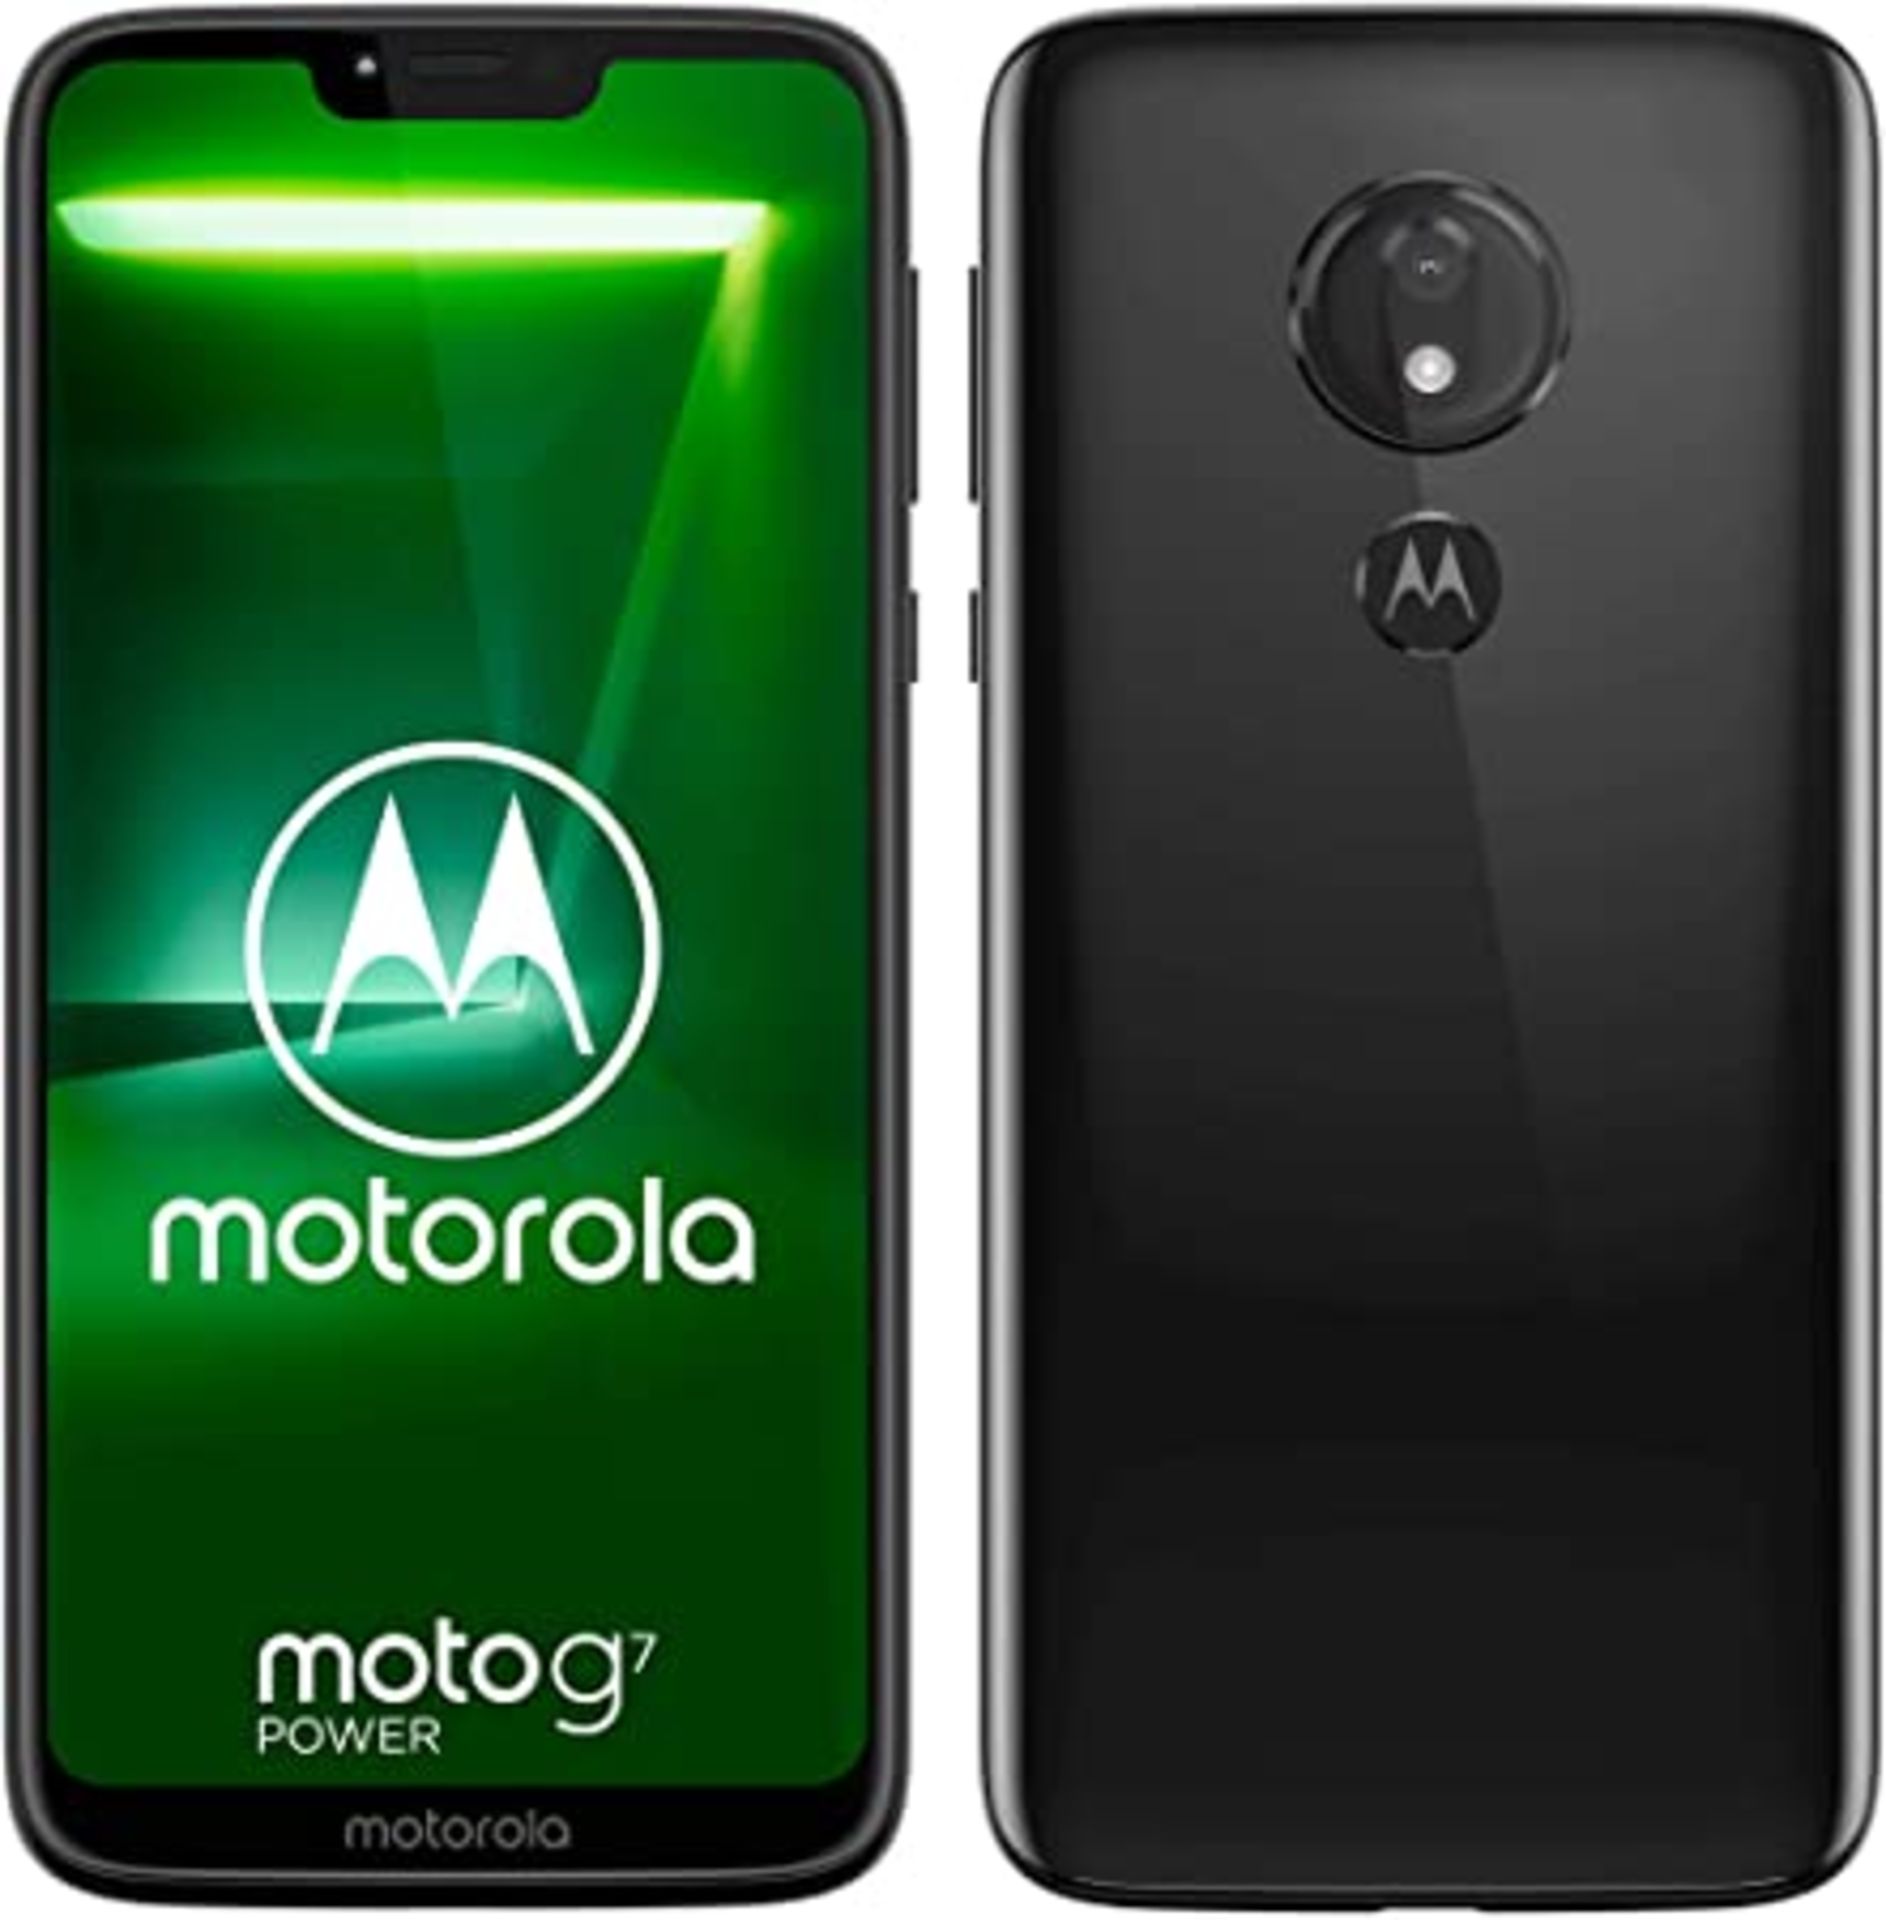 UNBOXED MOTOROLA SMARTPHONE IN BLACK (POWERS ON) RRP £129.99Condition ReportPOWERS ON